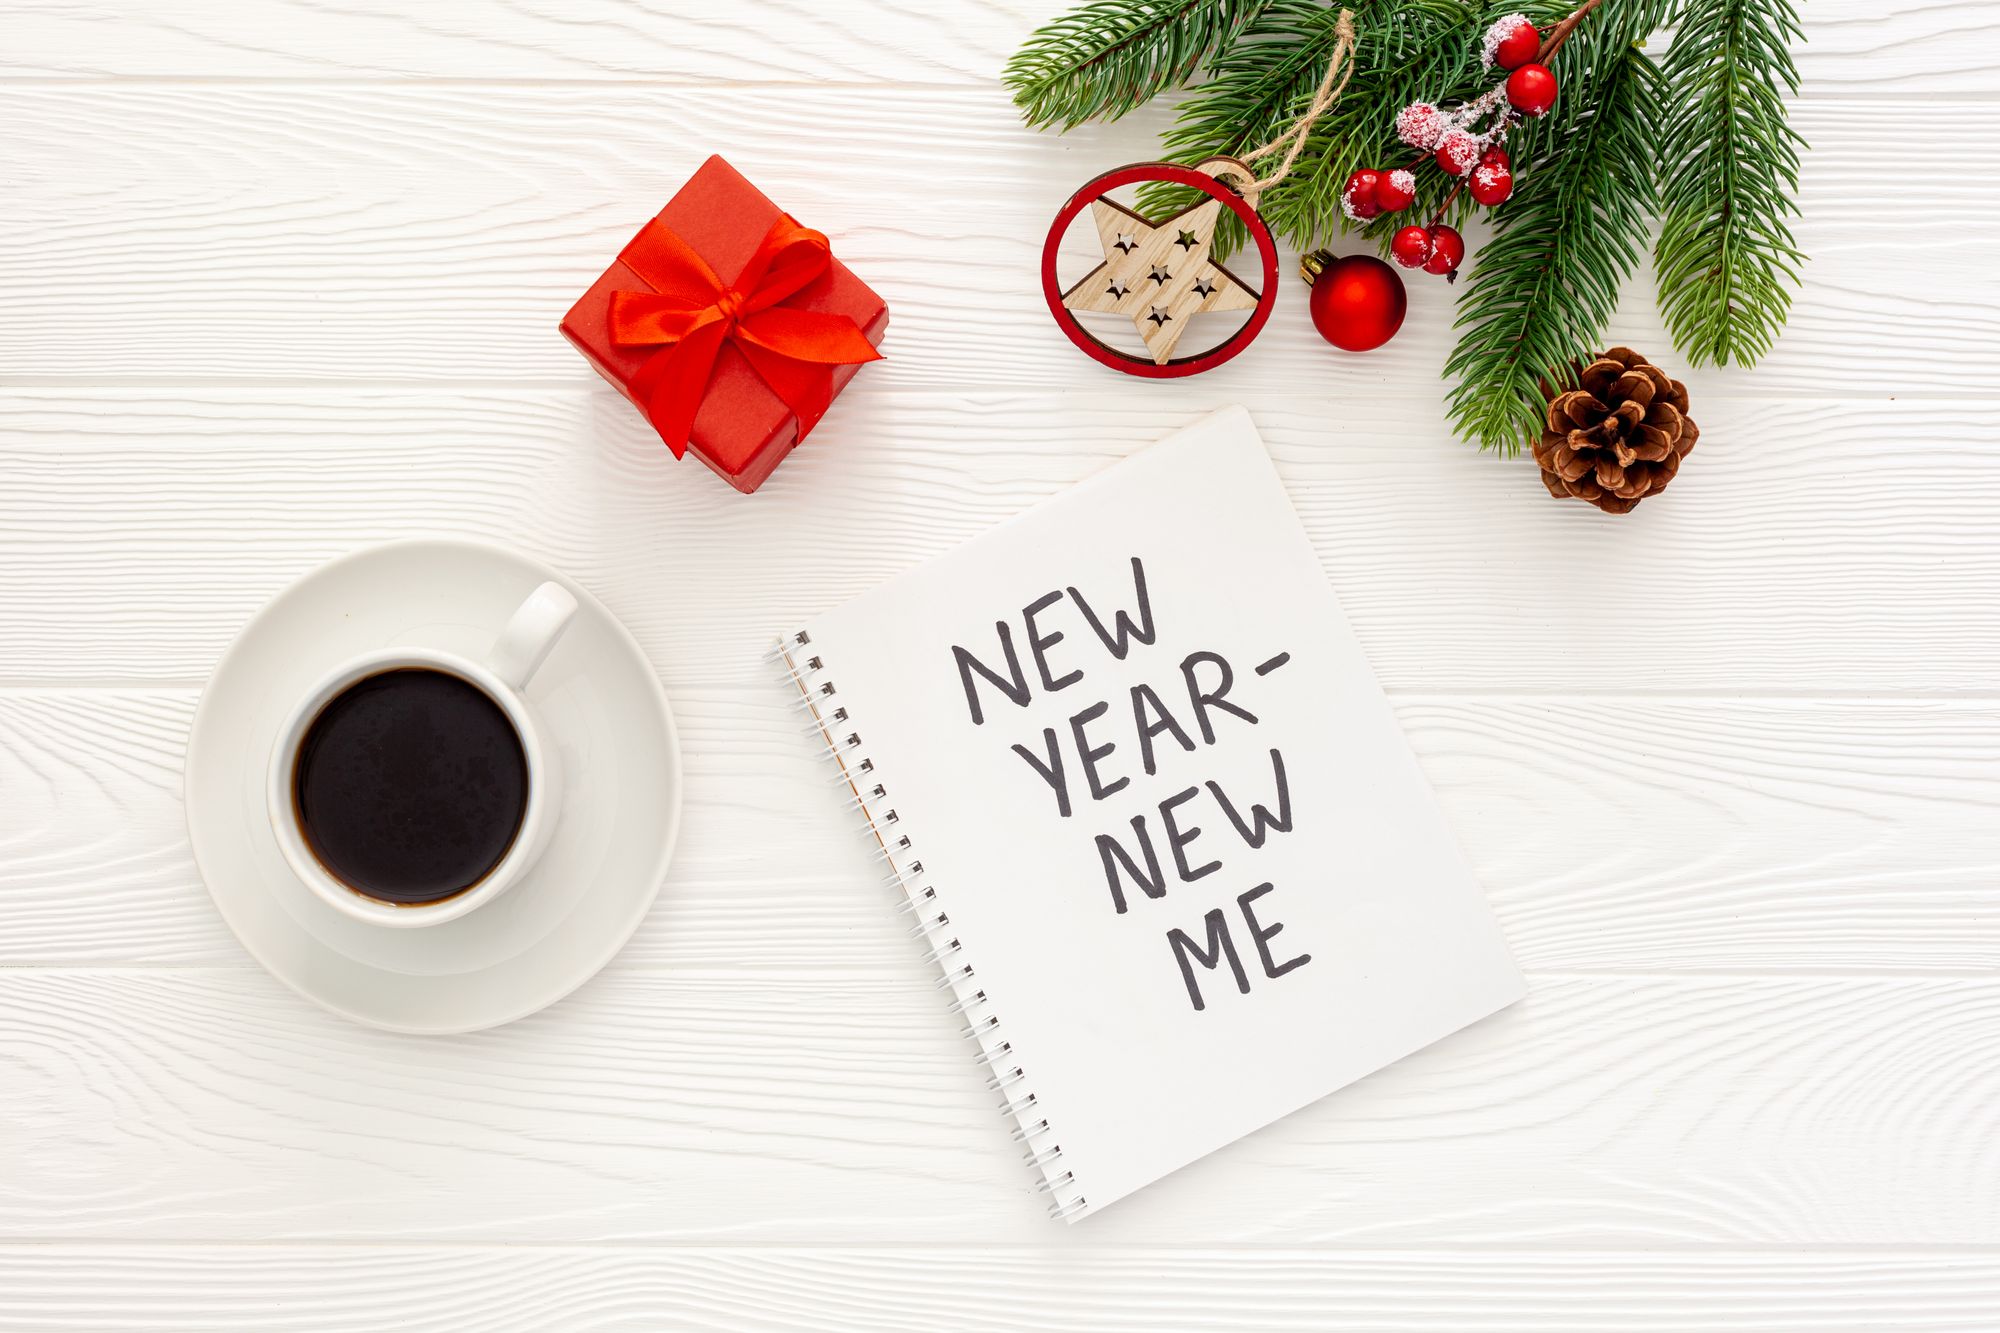 New Year's Resolution by PhotoOlivia | www.shutterstock.com